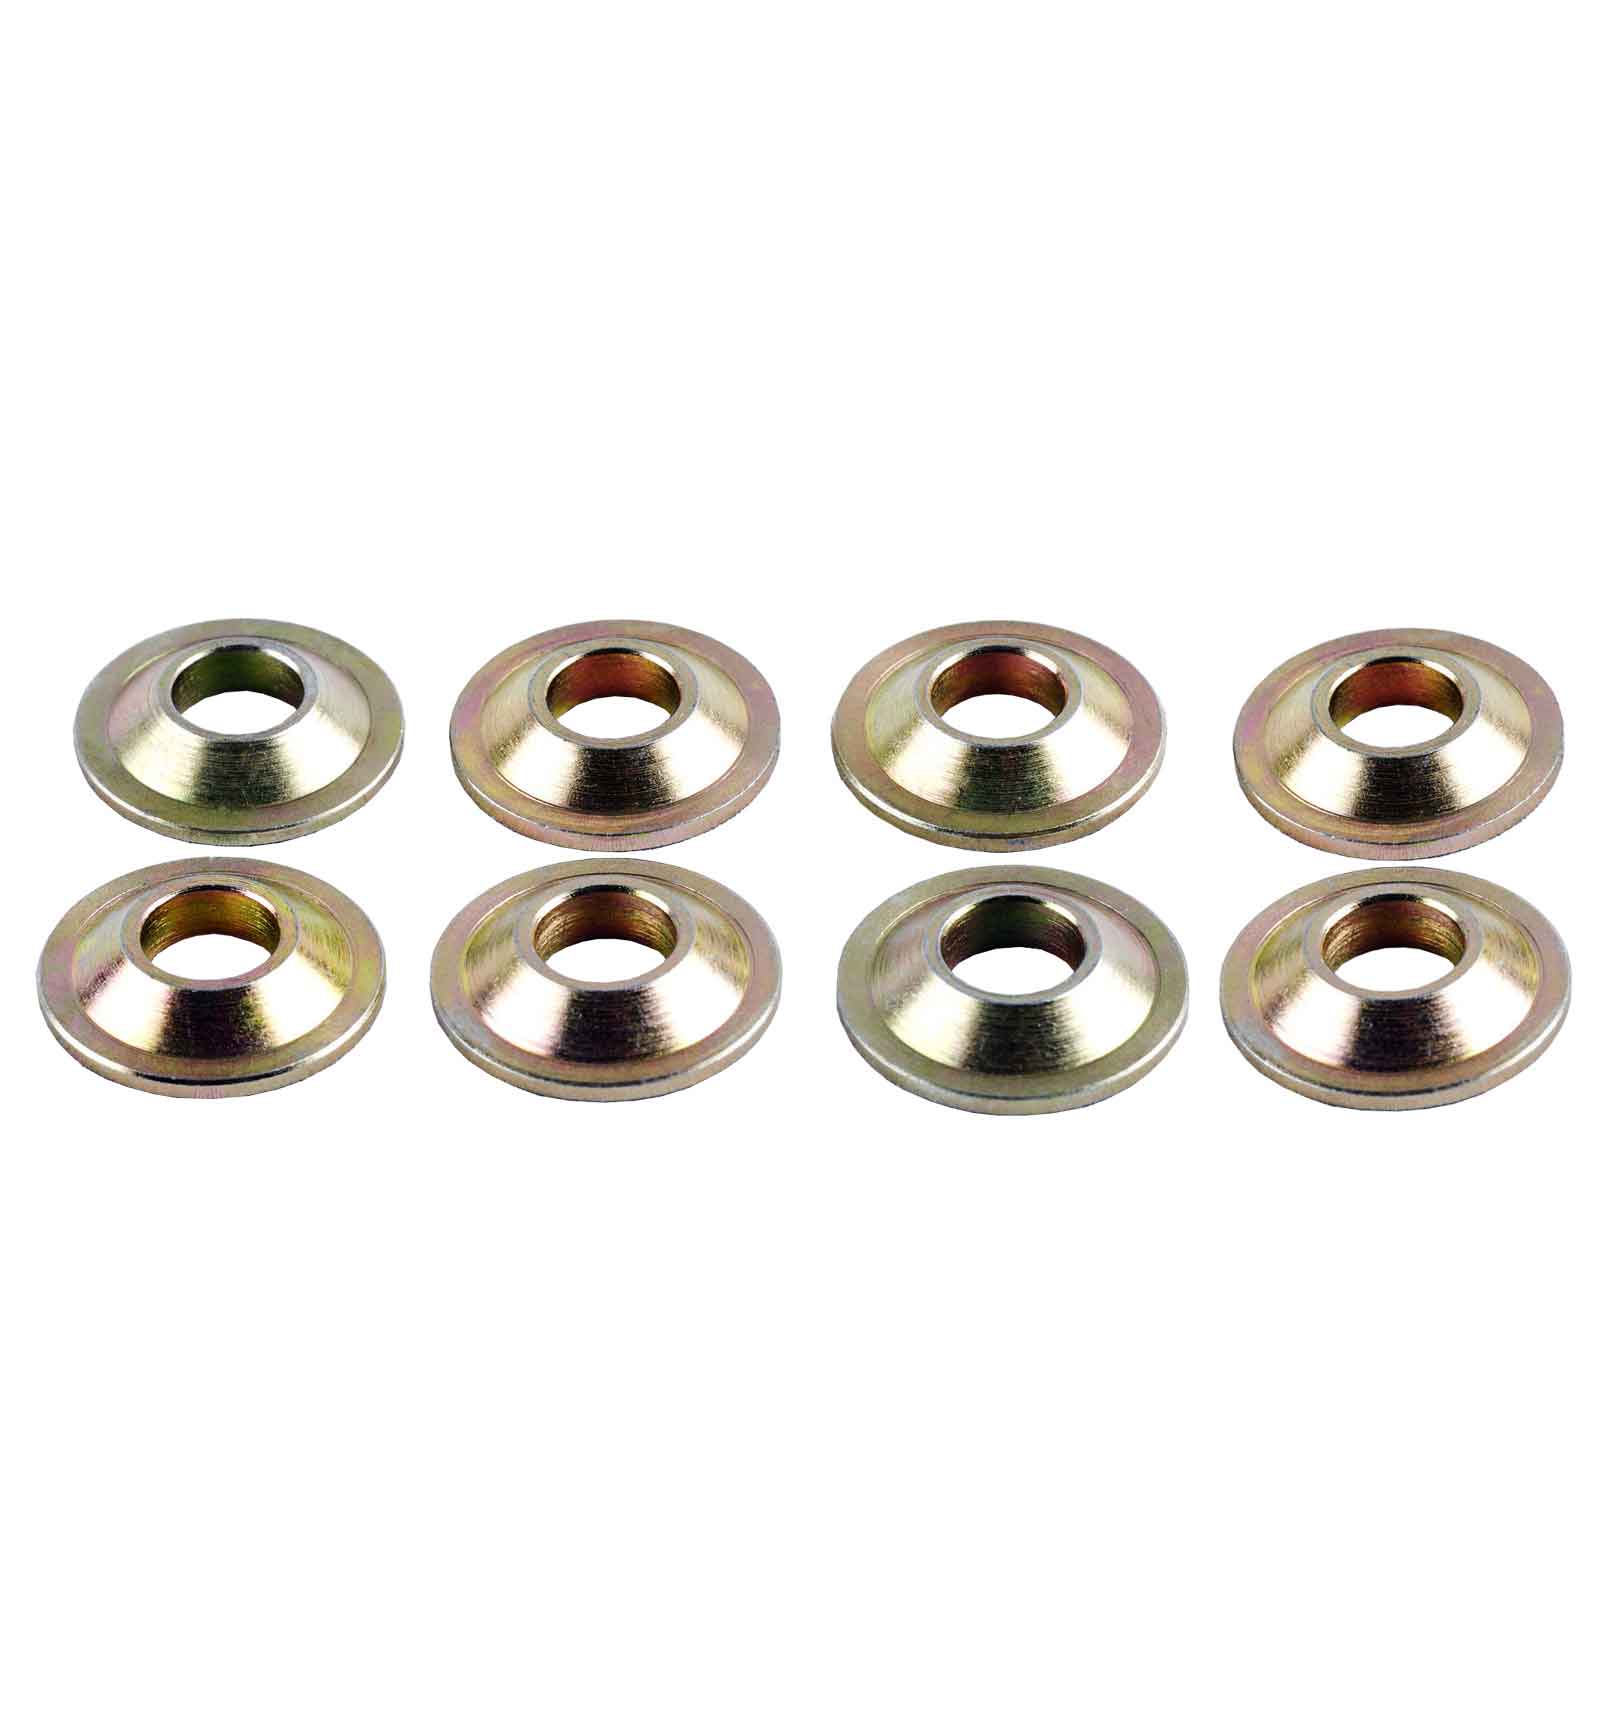 7/16" Rose Joint Misalignment Spacers (Pack of 8)